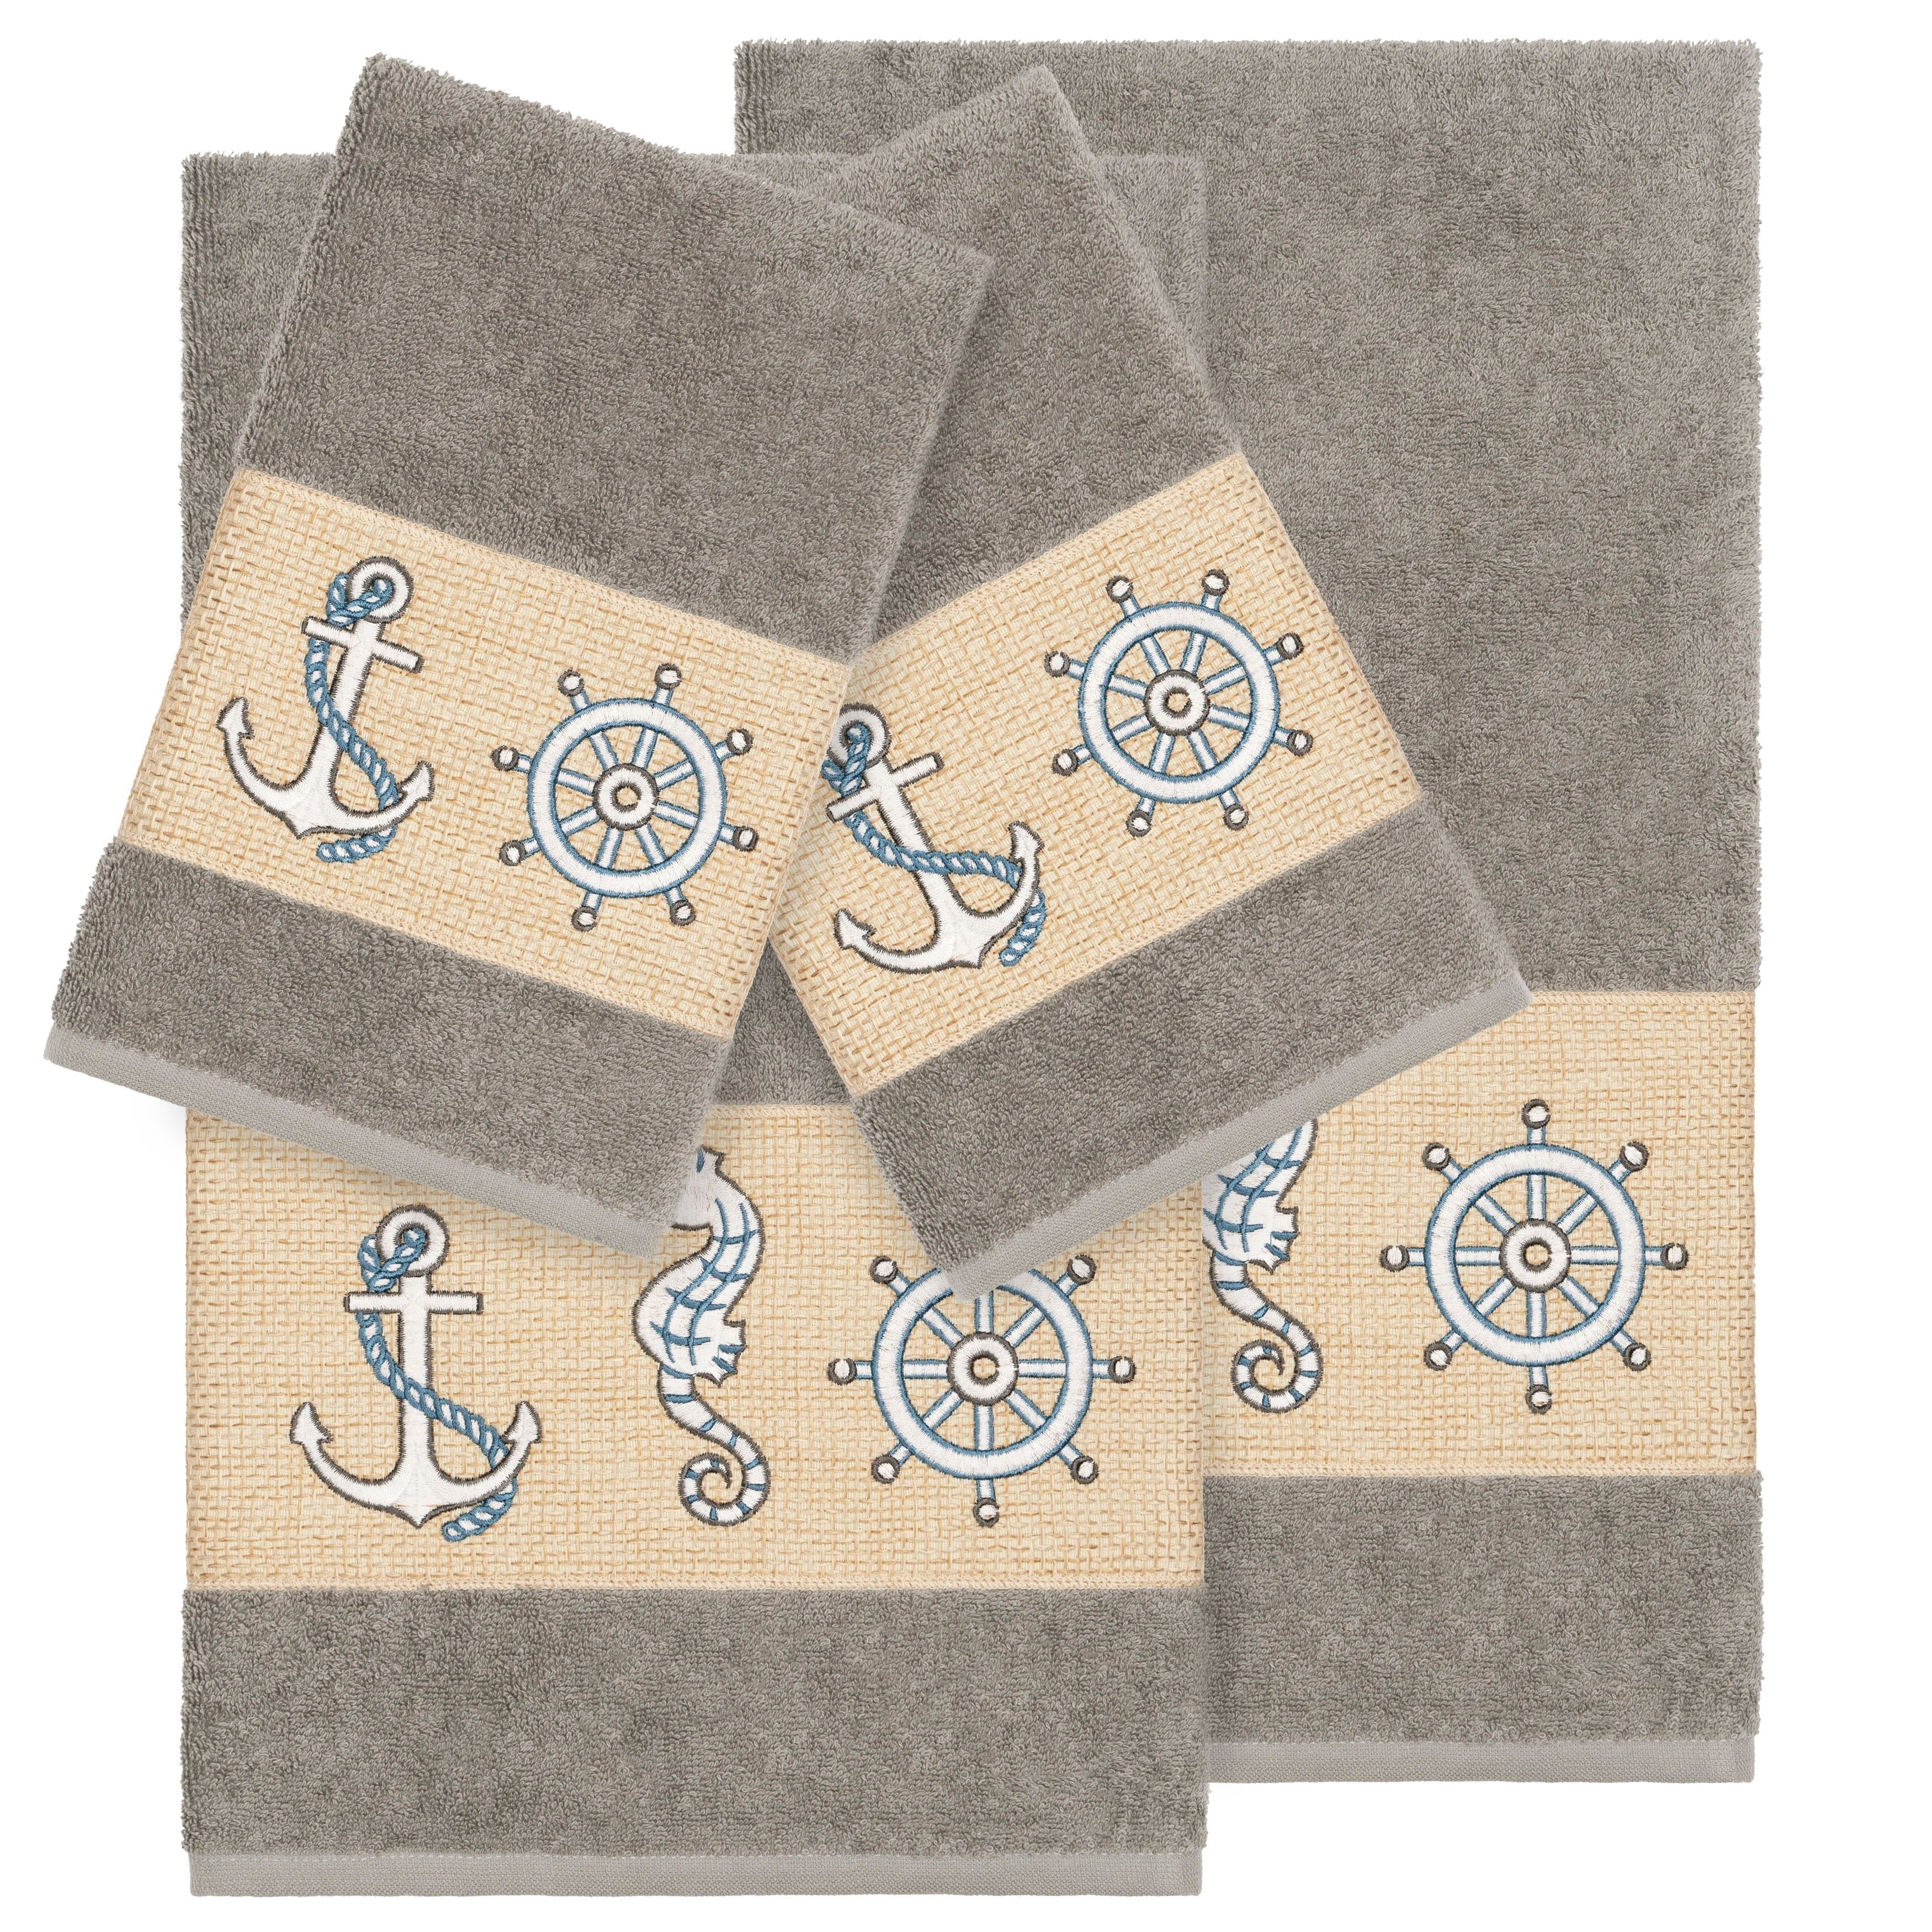 https://ak1.ostkcdn.com/images/products/22355605/Authentic-Hotel-and-Spa-Turkish-Cotton-Nautical-Embroidered-Dark-Grey-4-piece-Towel-Set-81c9bf36-adf8-4607-8e31-839db82579b6.jpg